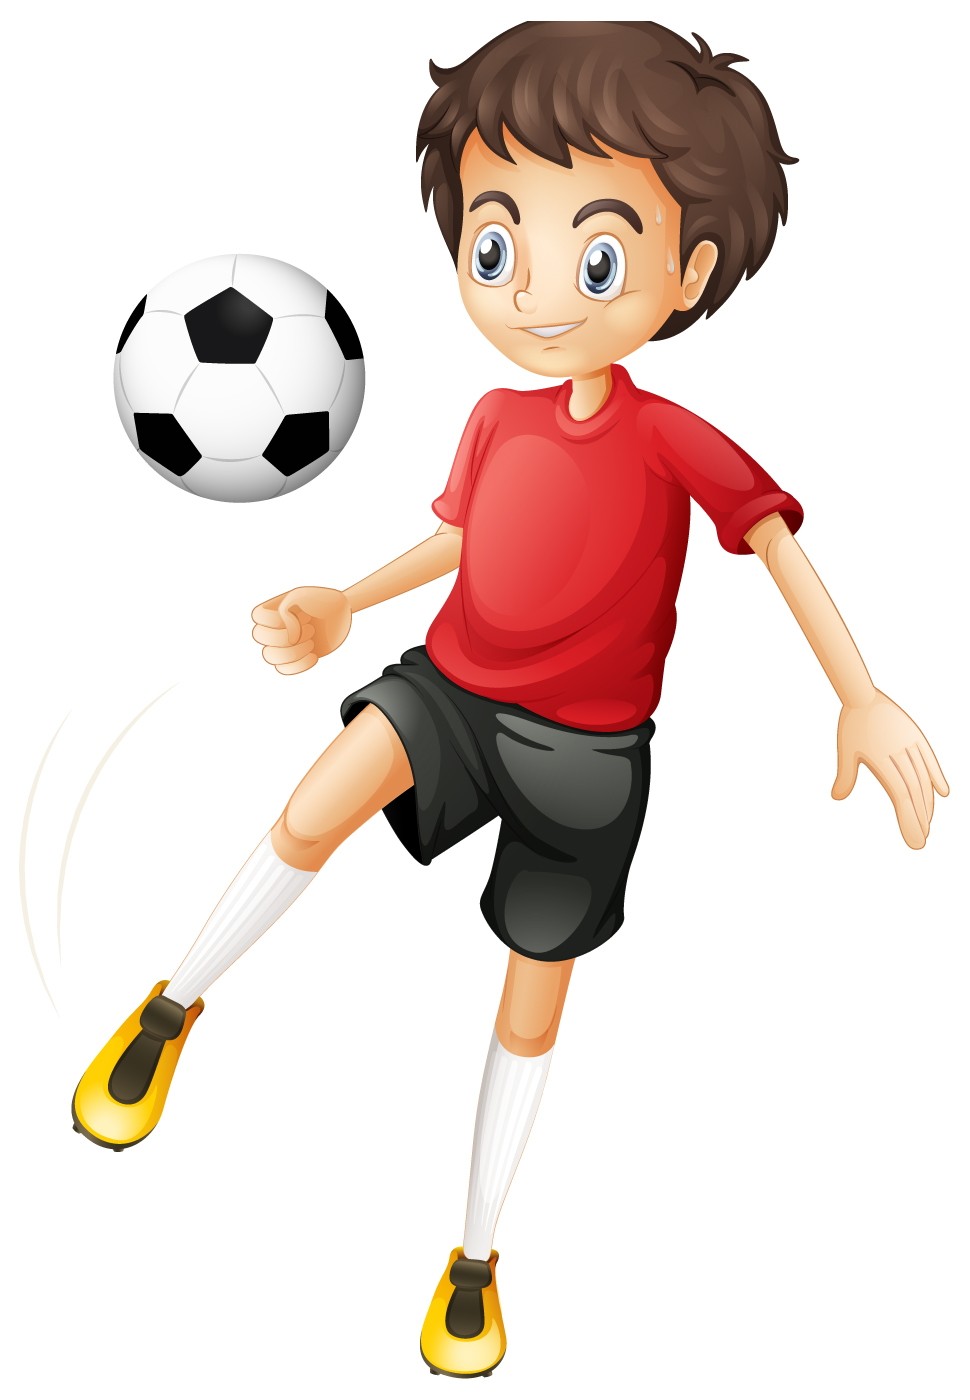 Football Cartoon Pictures | Free download on ClipArtMag